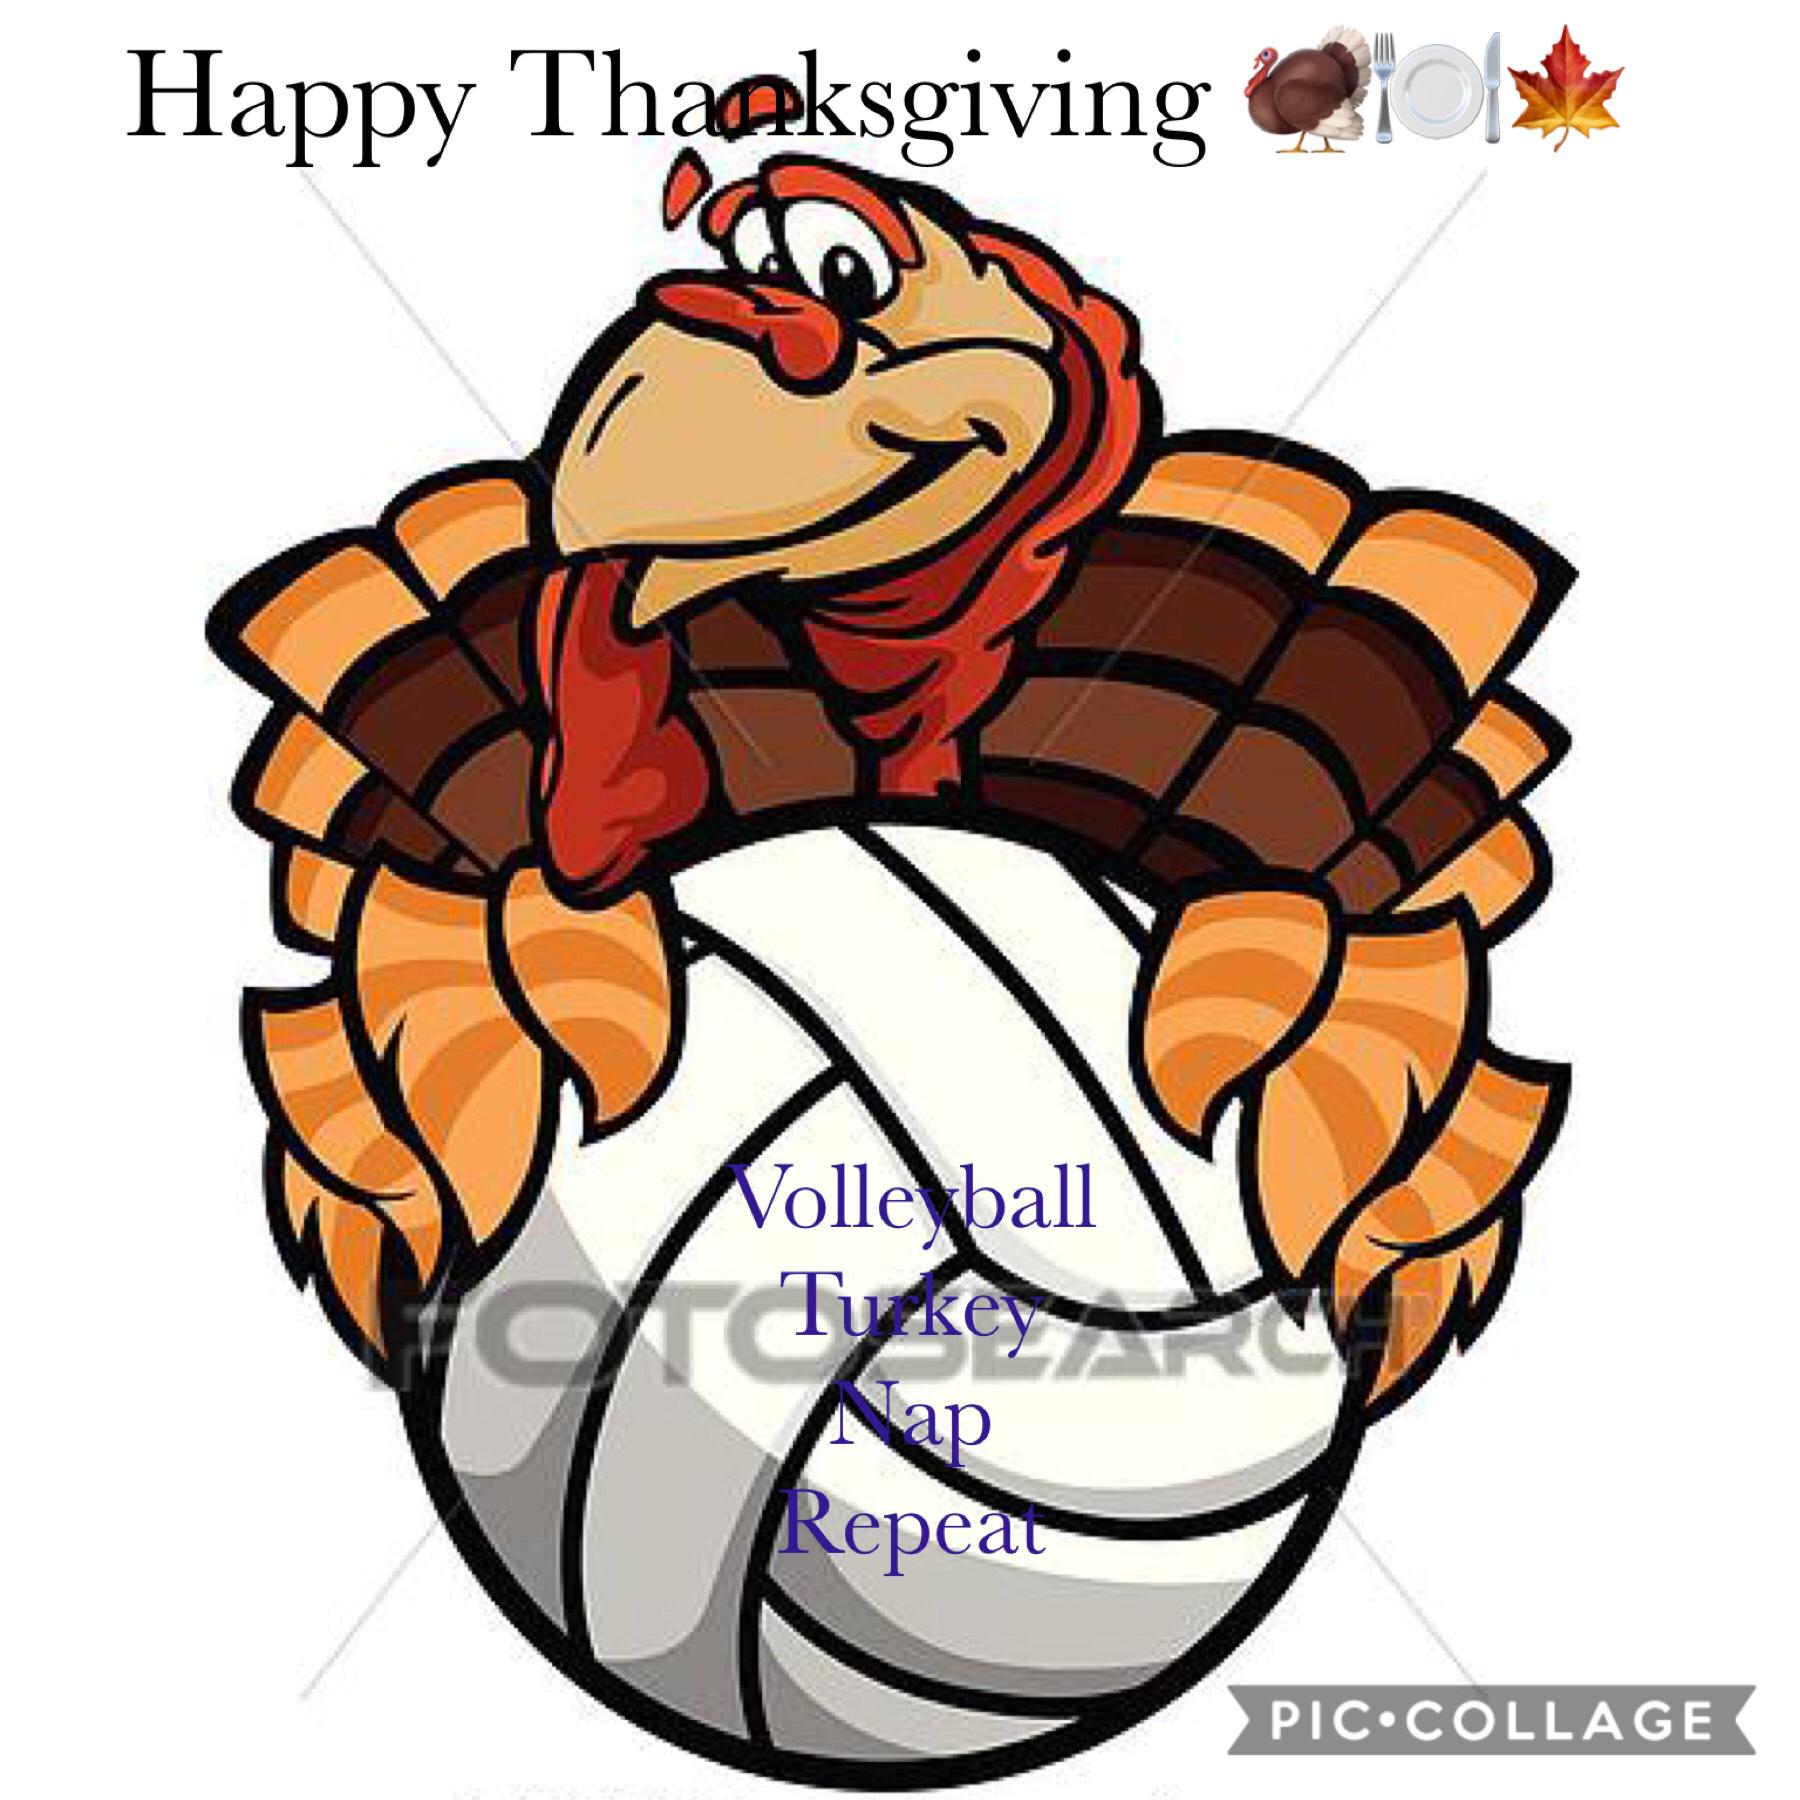 Happy thanksgiving to all